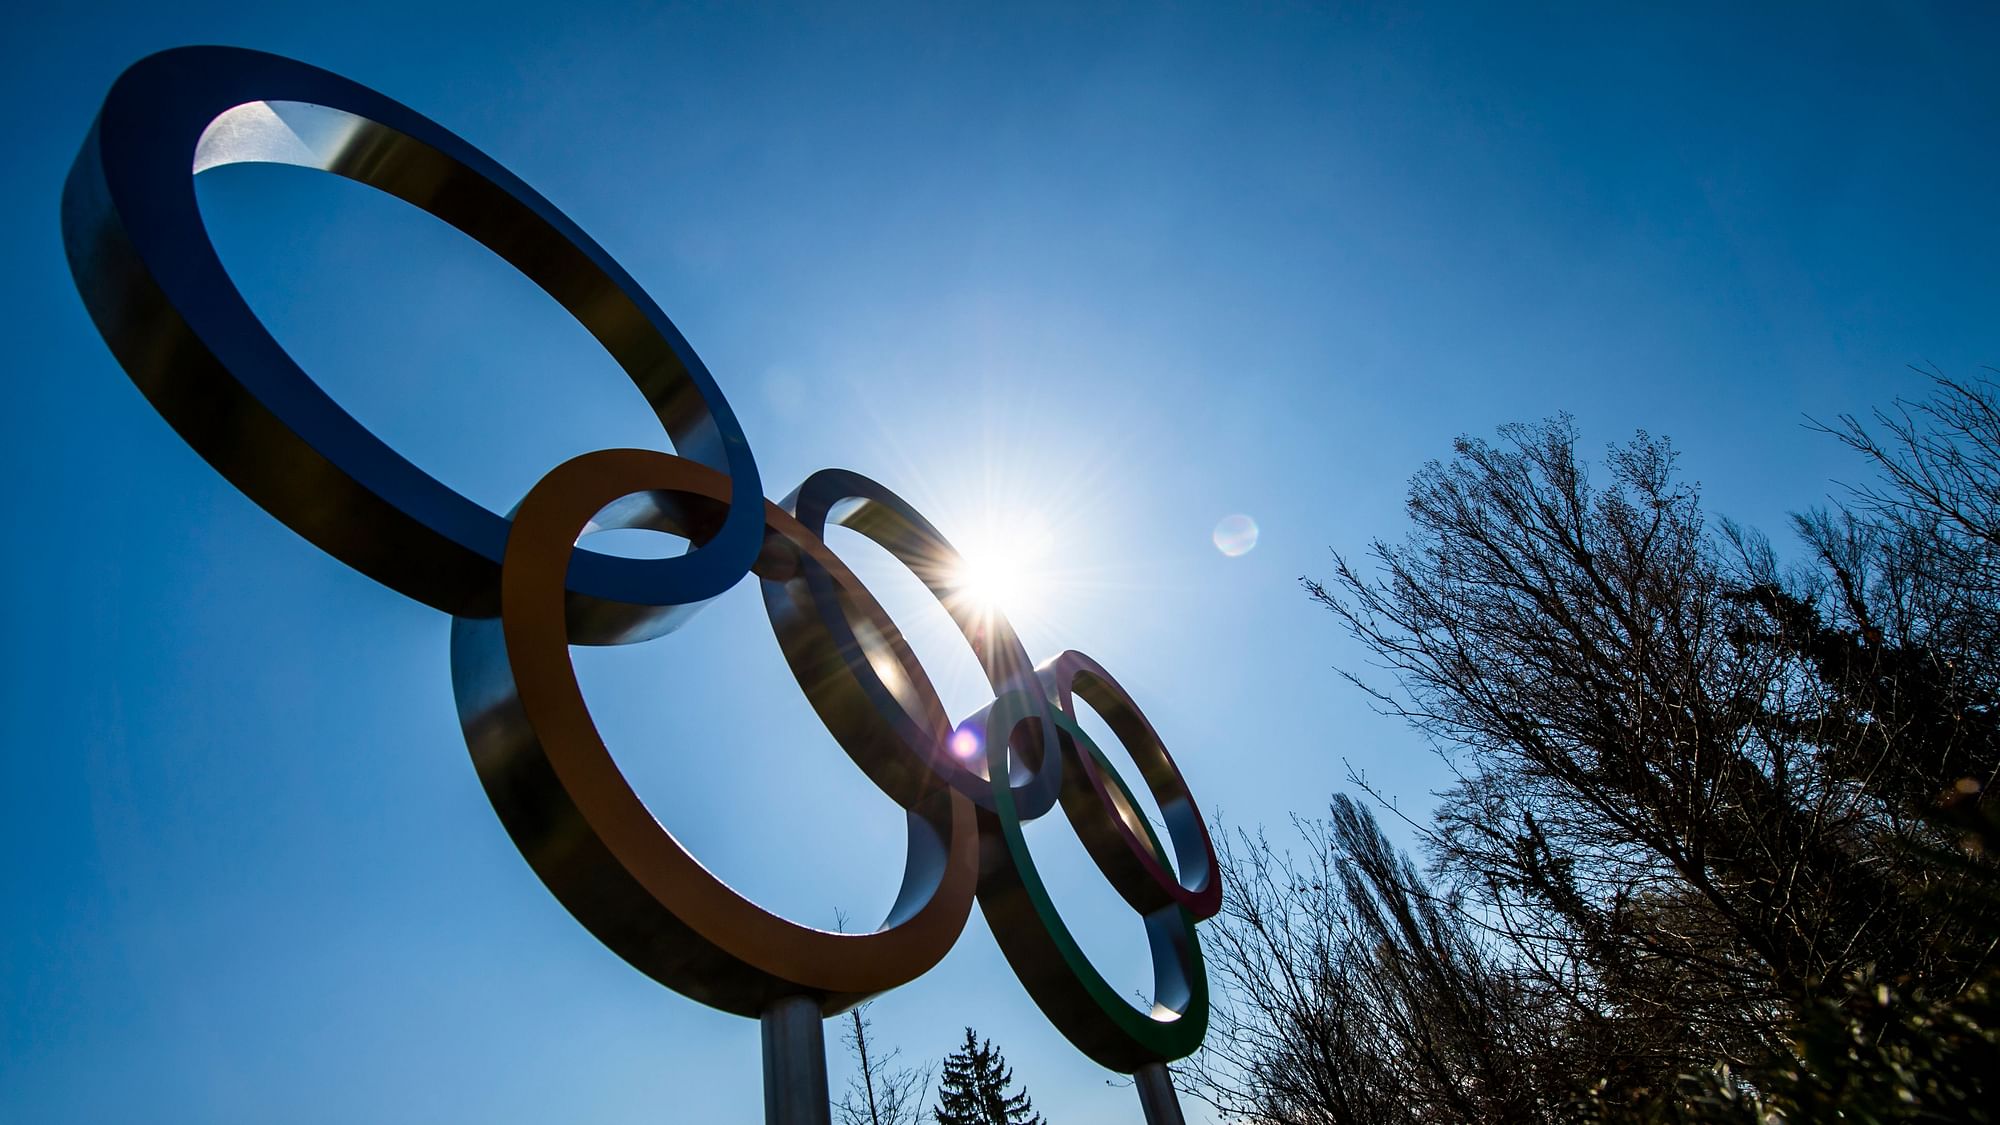 The 2020 Tokyo Olympics have officially been postponed.